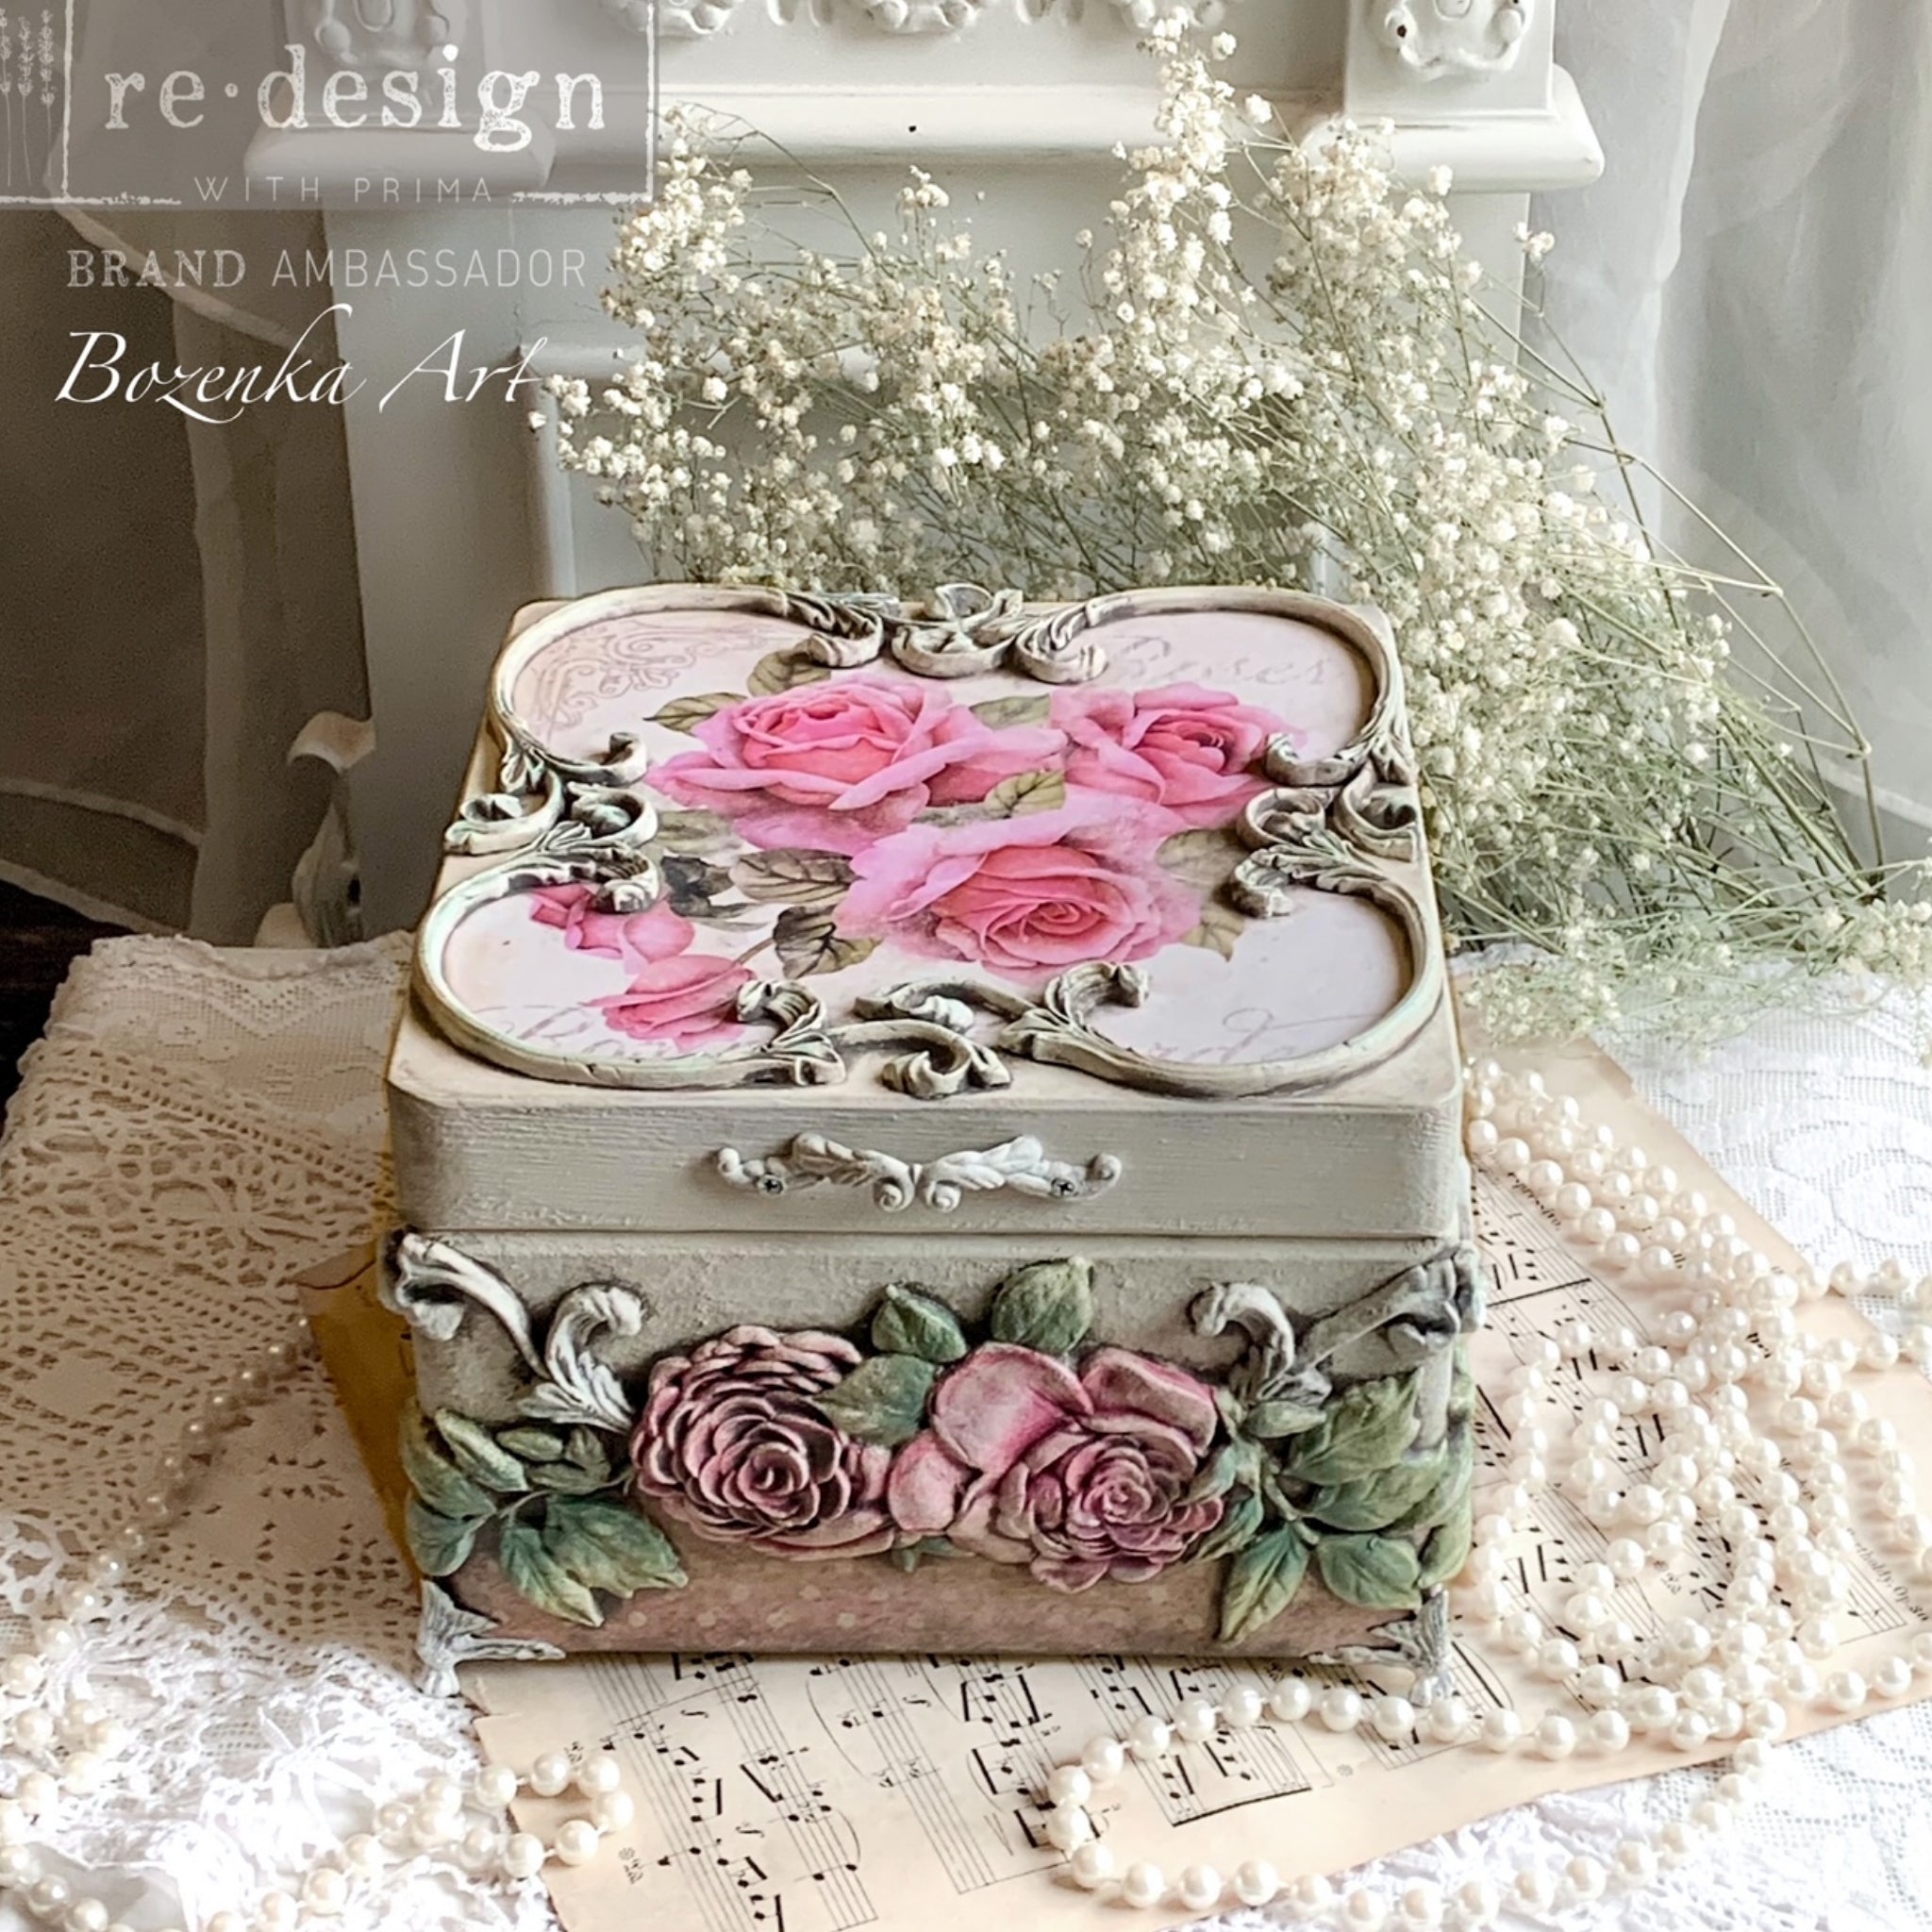 A small box refurbished by Bozenka Art is decorated with ReDesign with Prima's Victorian Rose silicone mould castings.